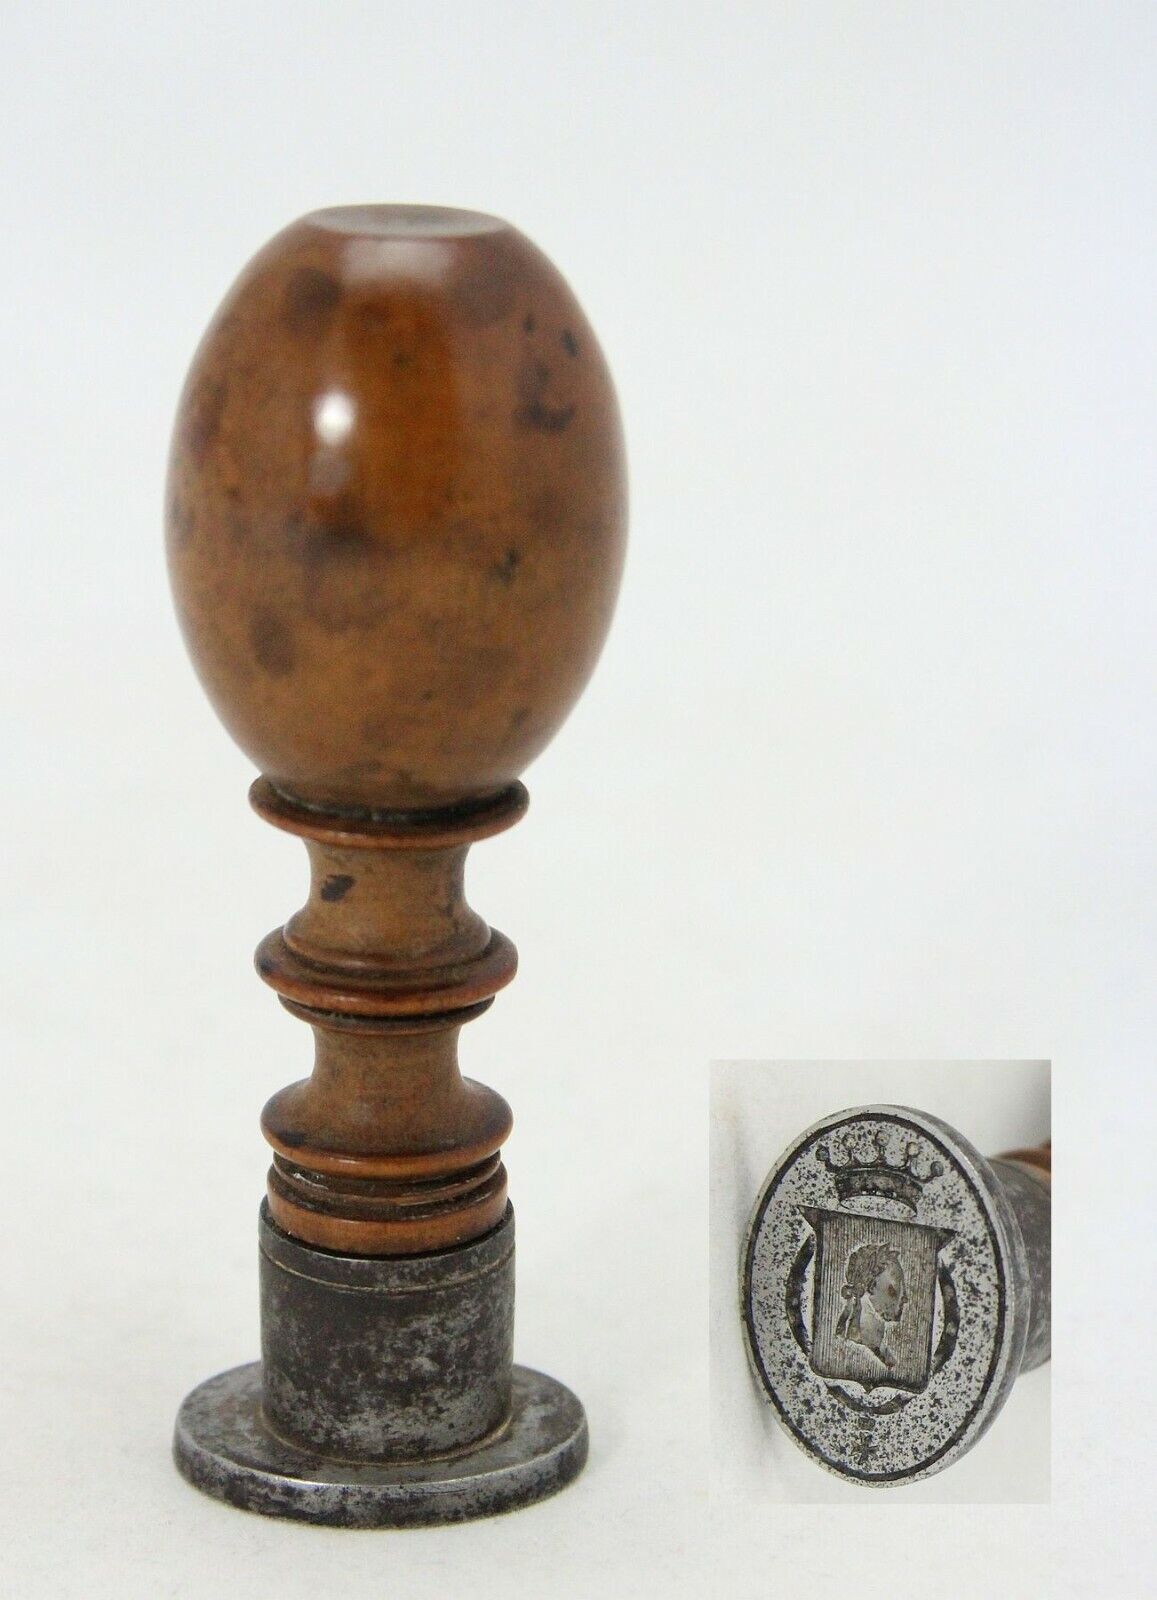 antique 17th C wood & iron wax seal with coat of arms Pieter / Peter / P.C Hooft